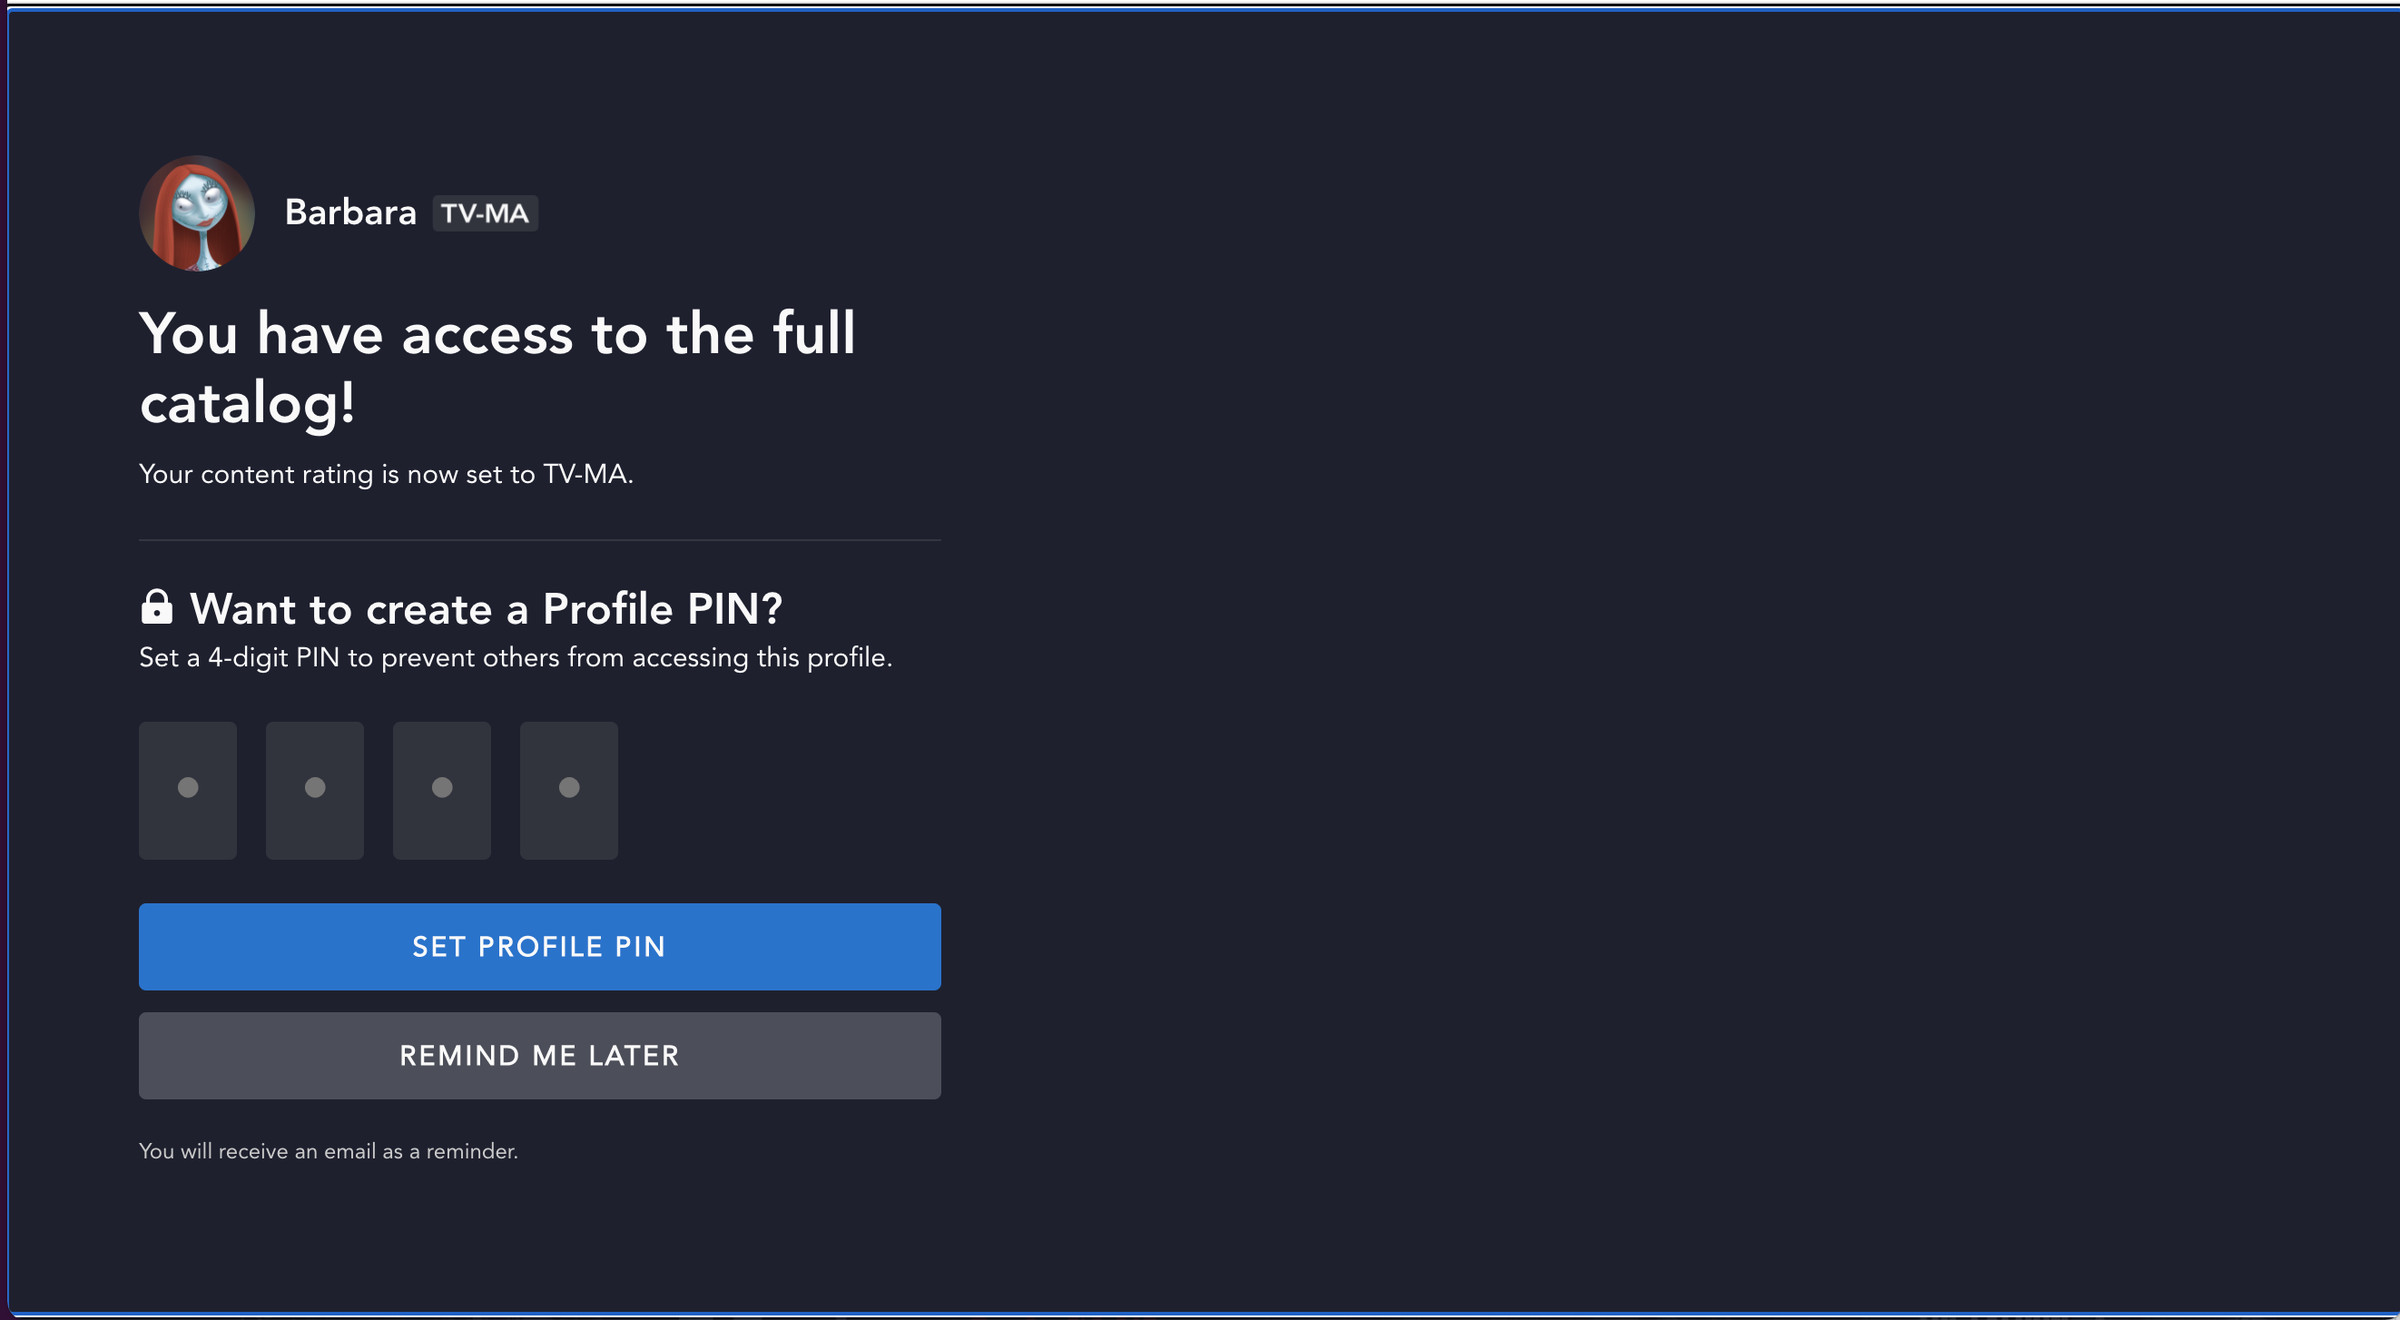 You can enter a PIN to protect your profile.